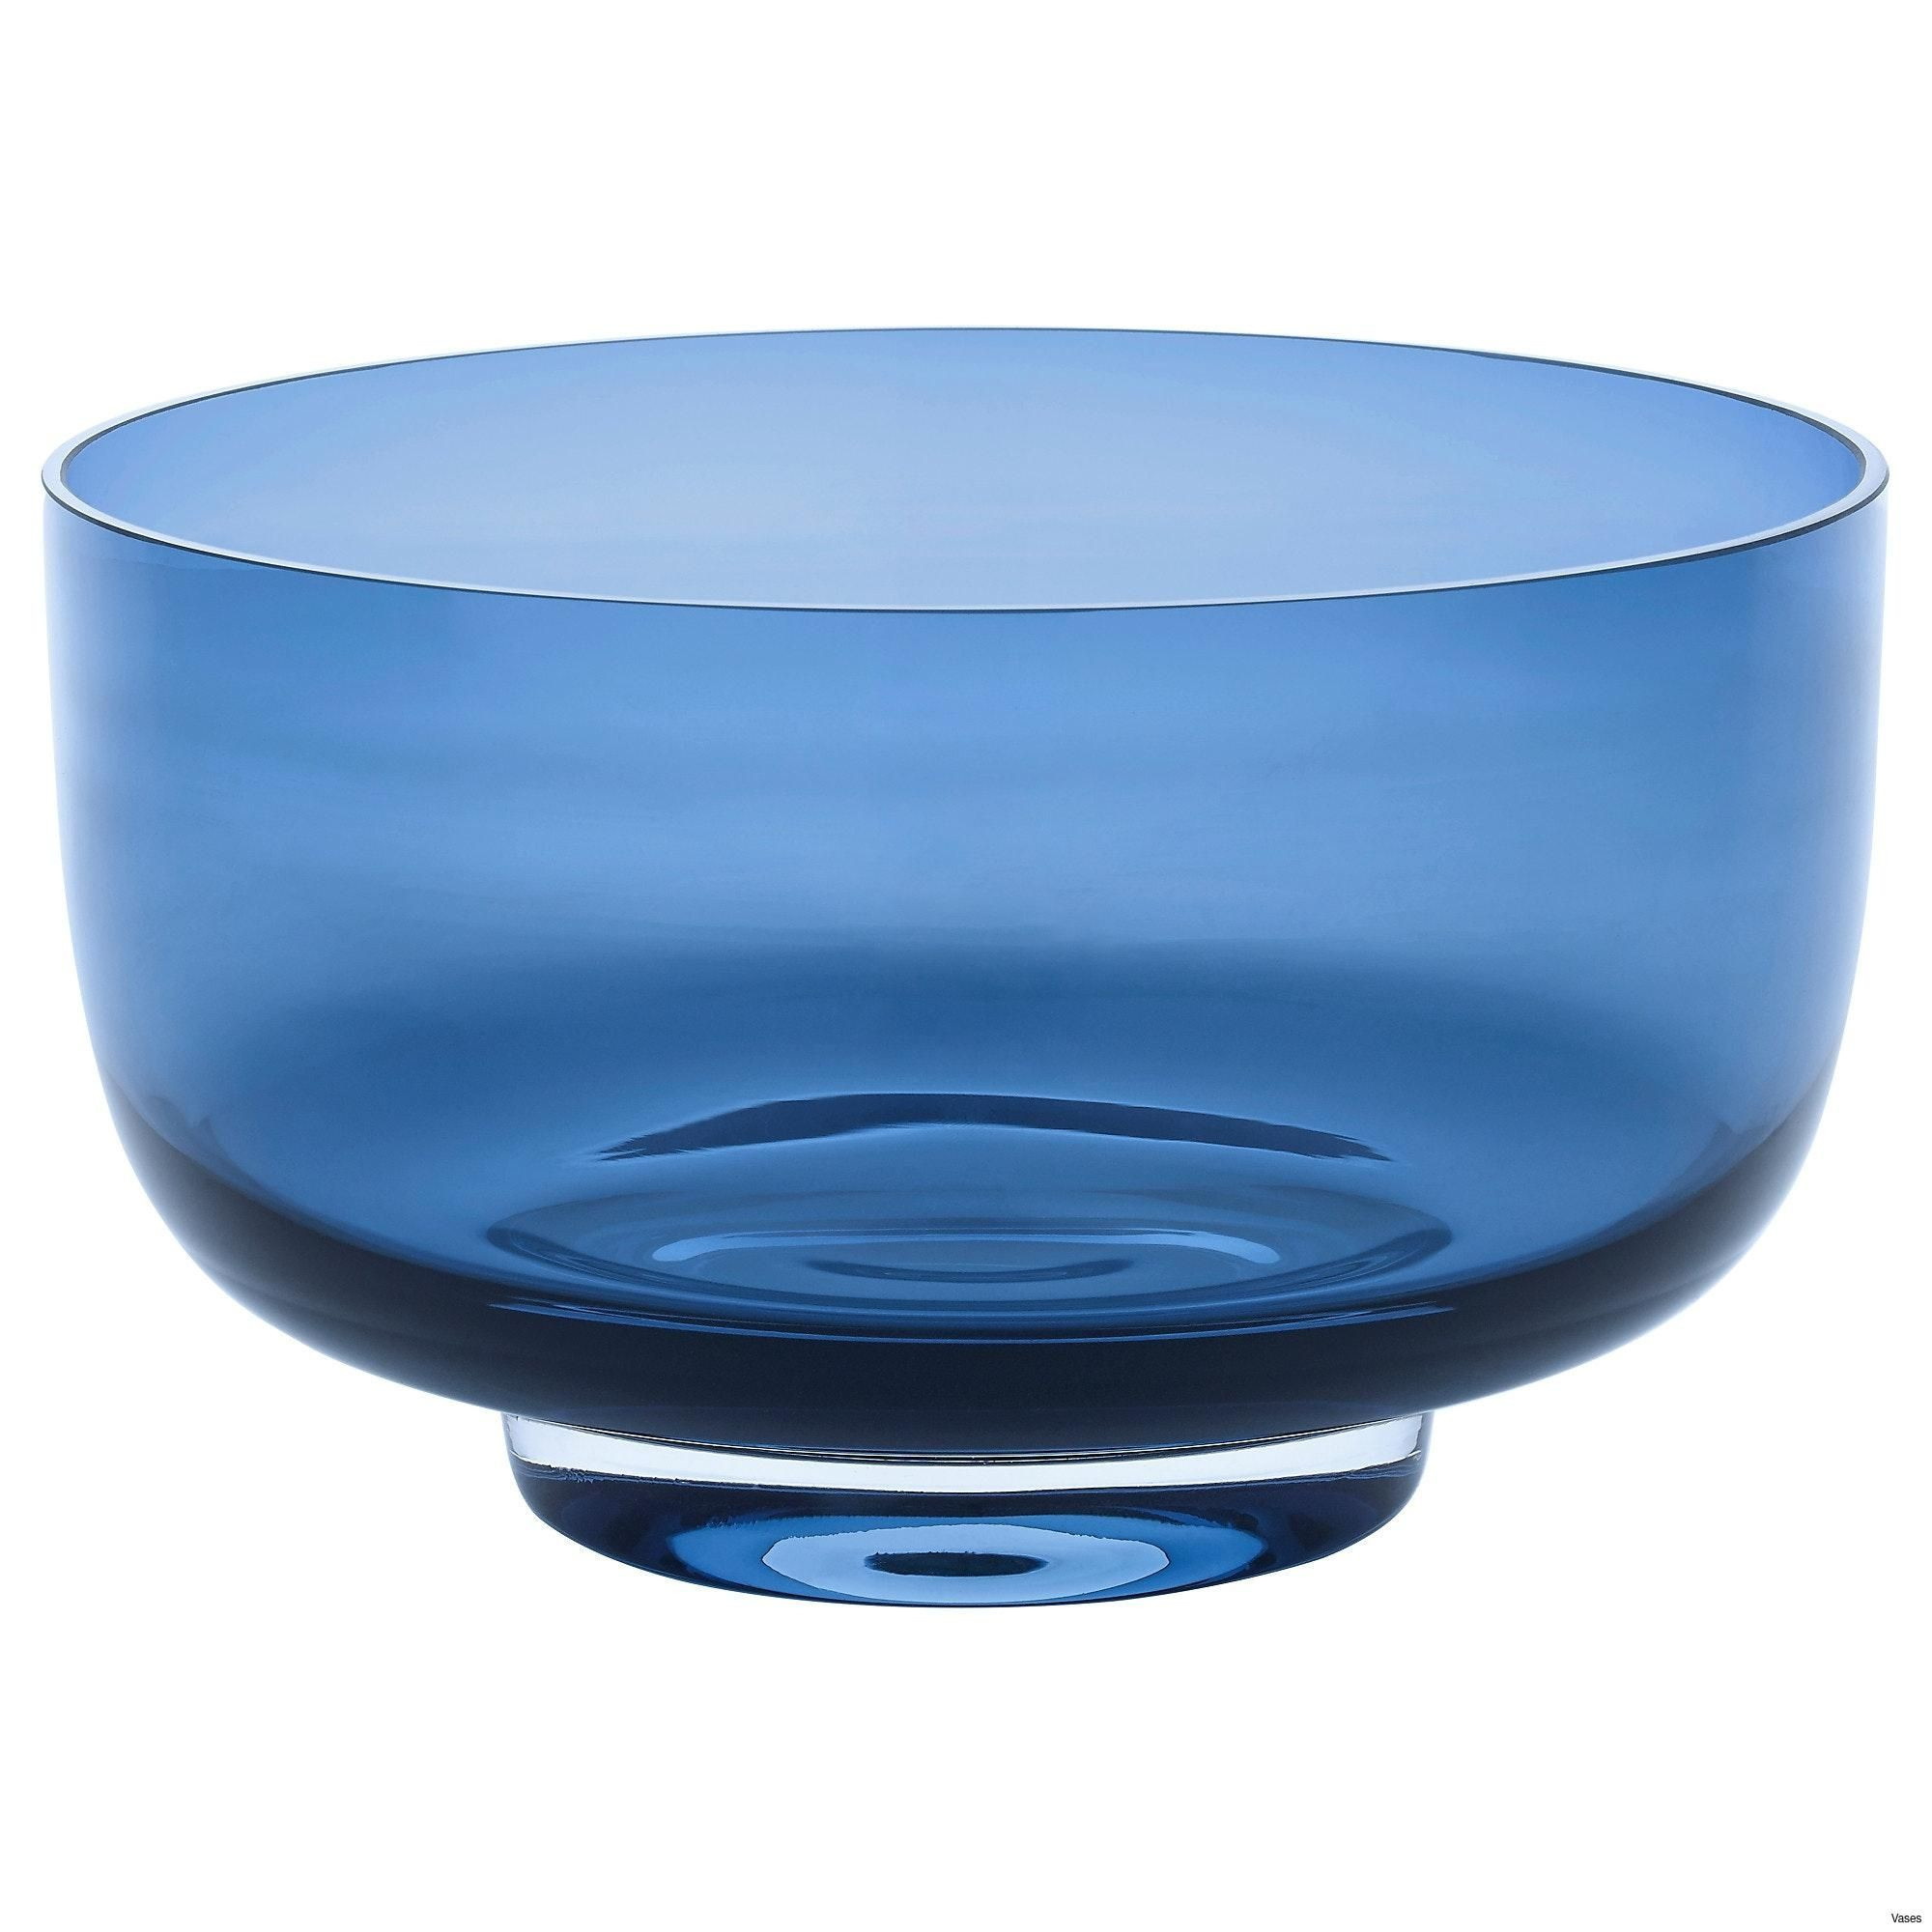 23 attractive Colored Glass Vases wholesale 2022 free download colored glass vases wholesale of 23 blue crystal vase the weekly world with regard to decorative glass bowl new living room ikea vases awesome pe s5h